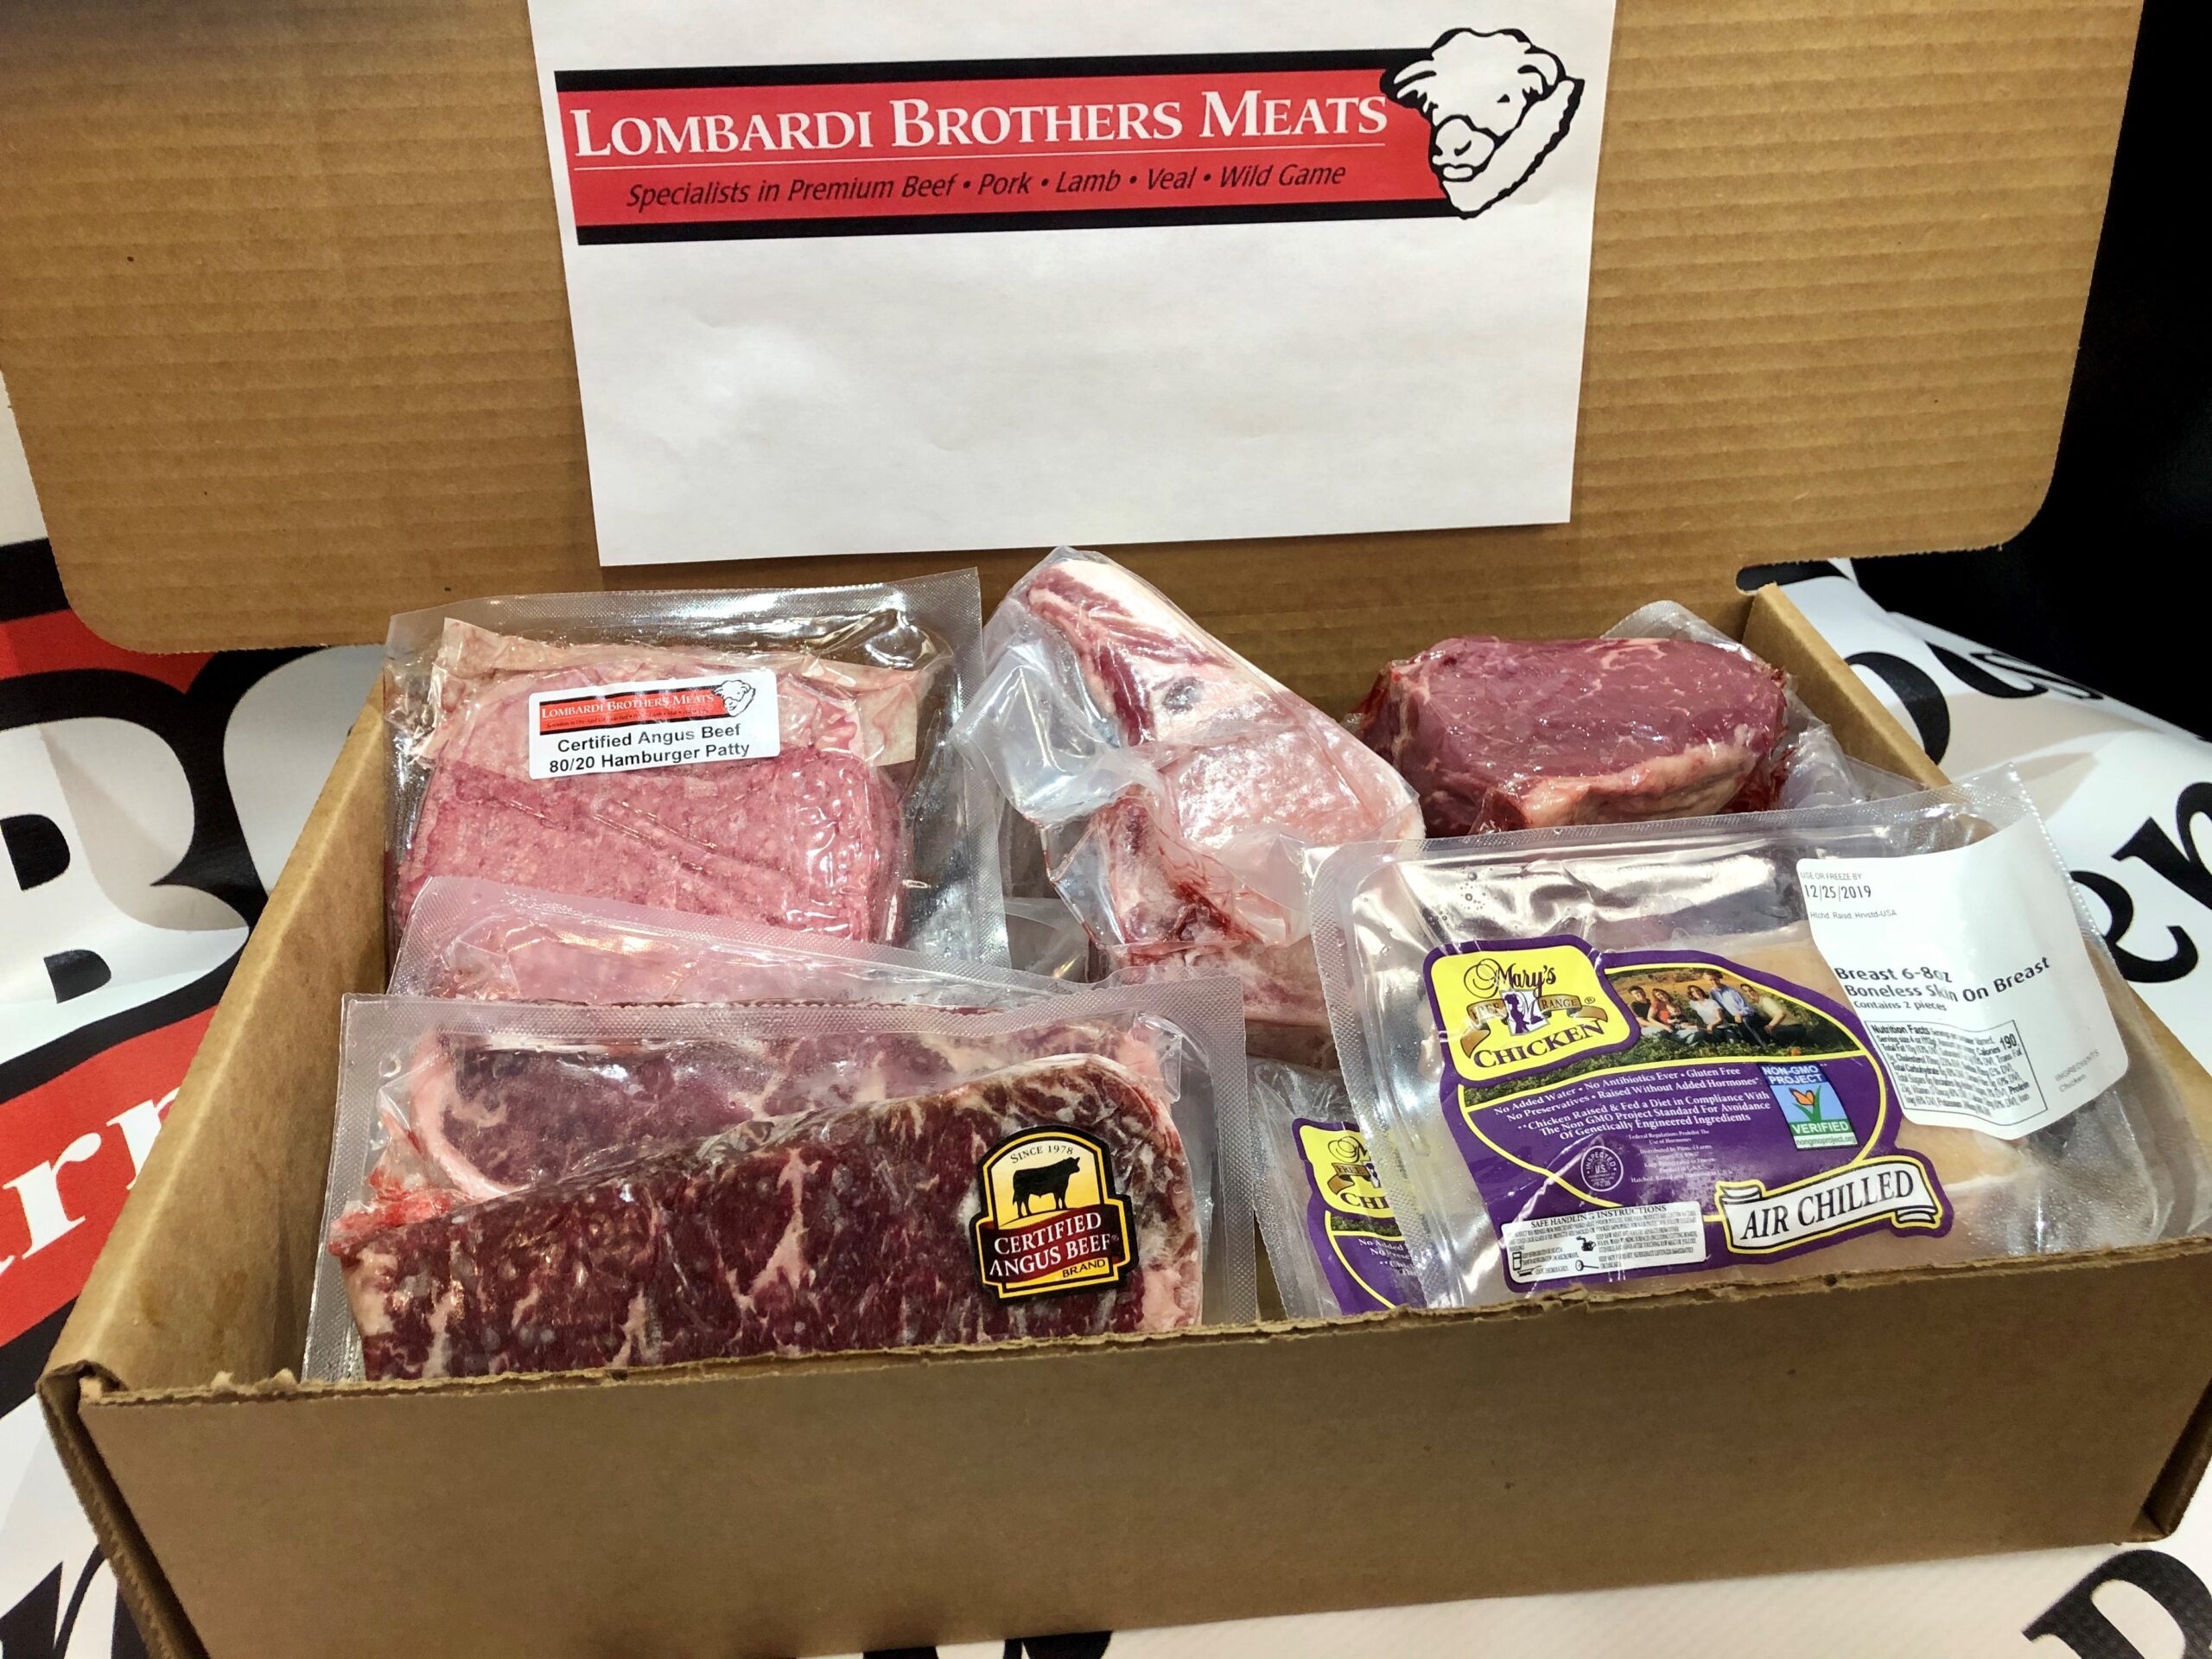 MILE HIGH AGED BEEF - Lombardi Brothers Meats